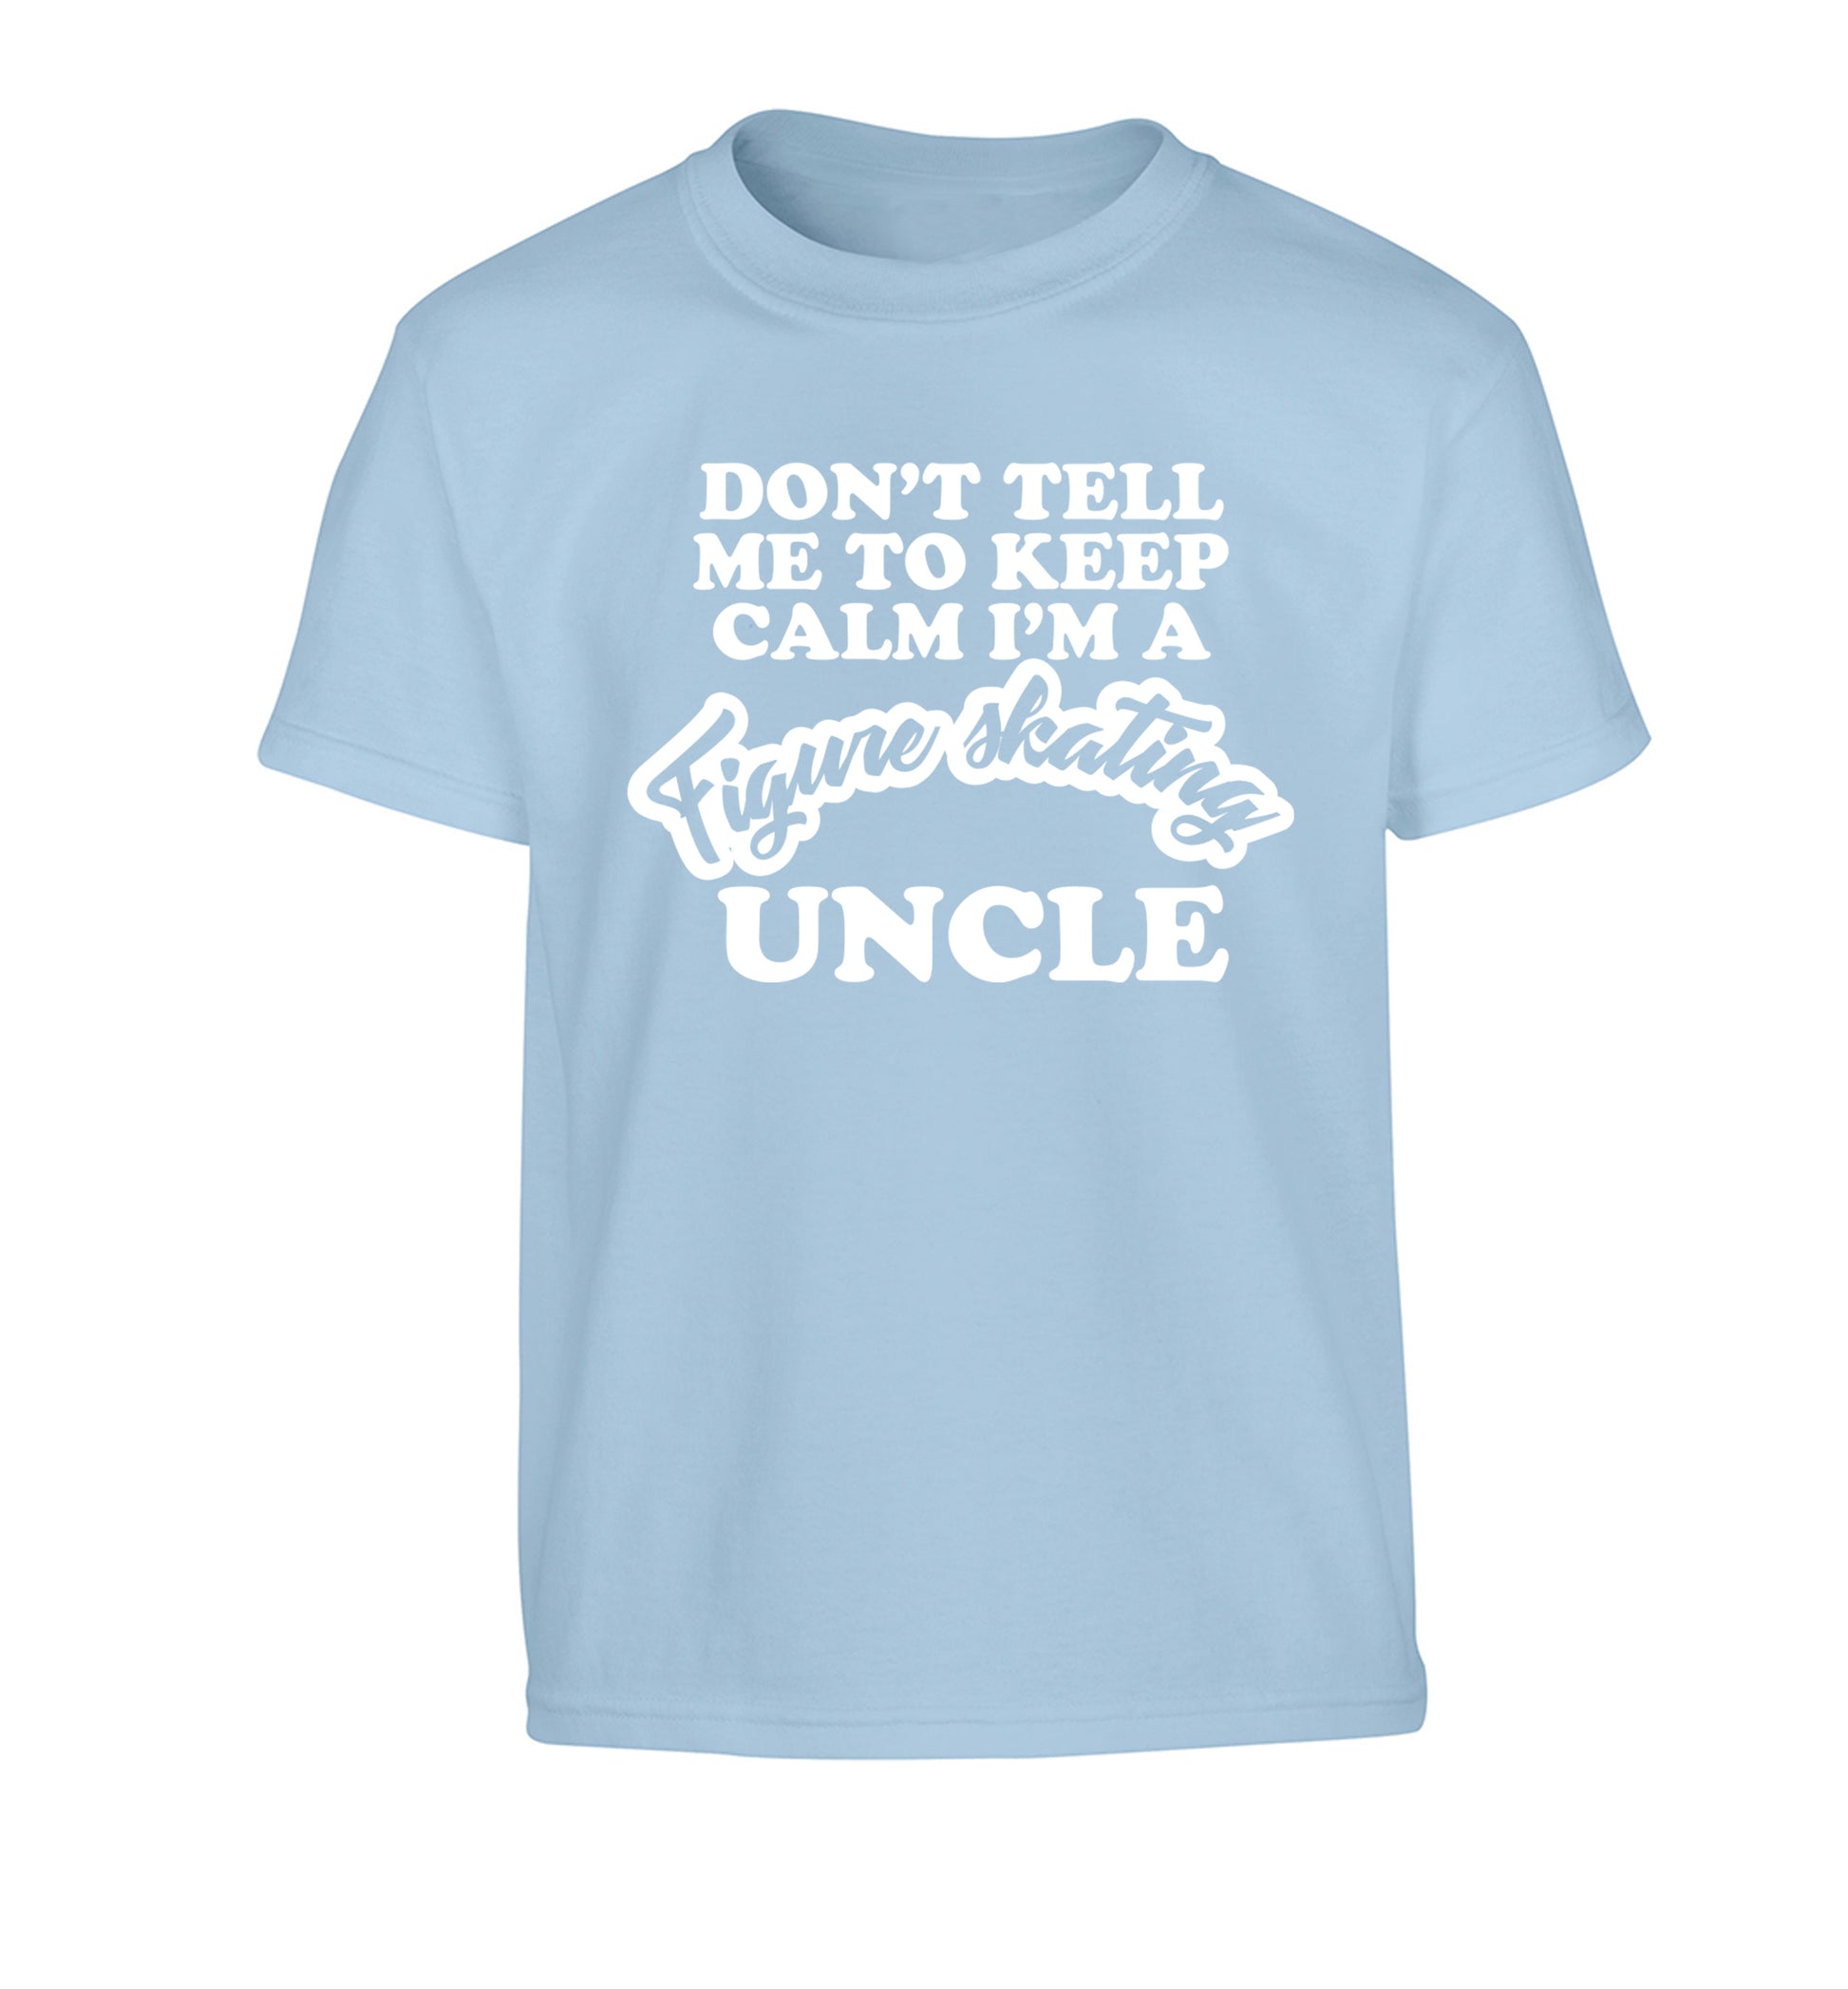 Don't tell me to keep calm I'm a figure skating uncle Children's light blue Tshirt 12-14 Years